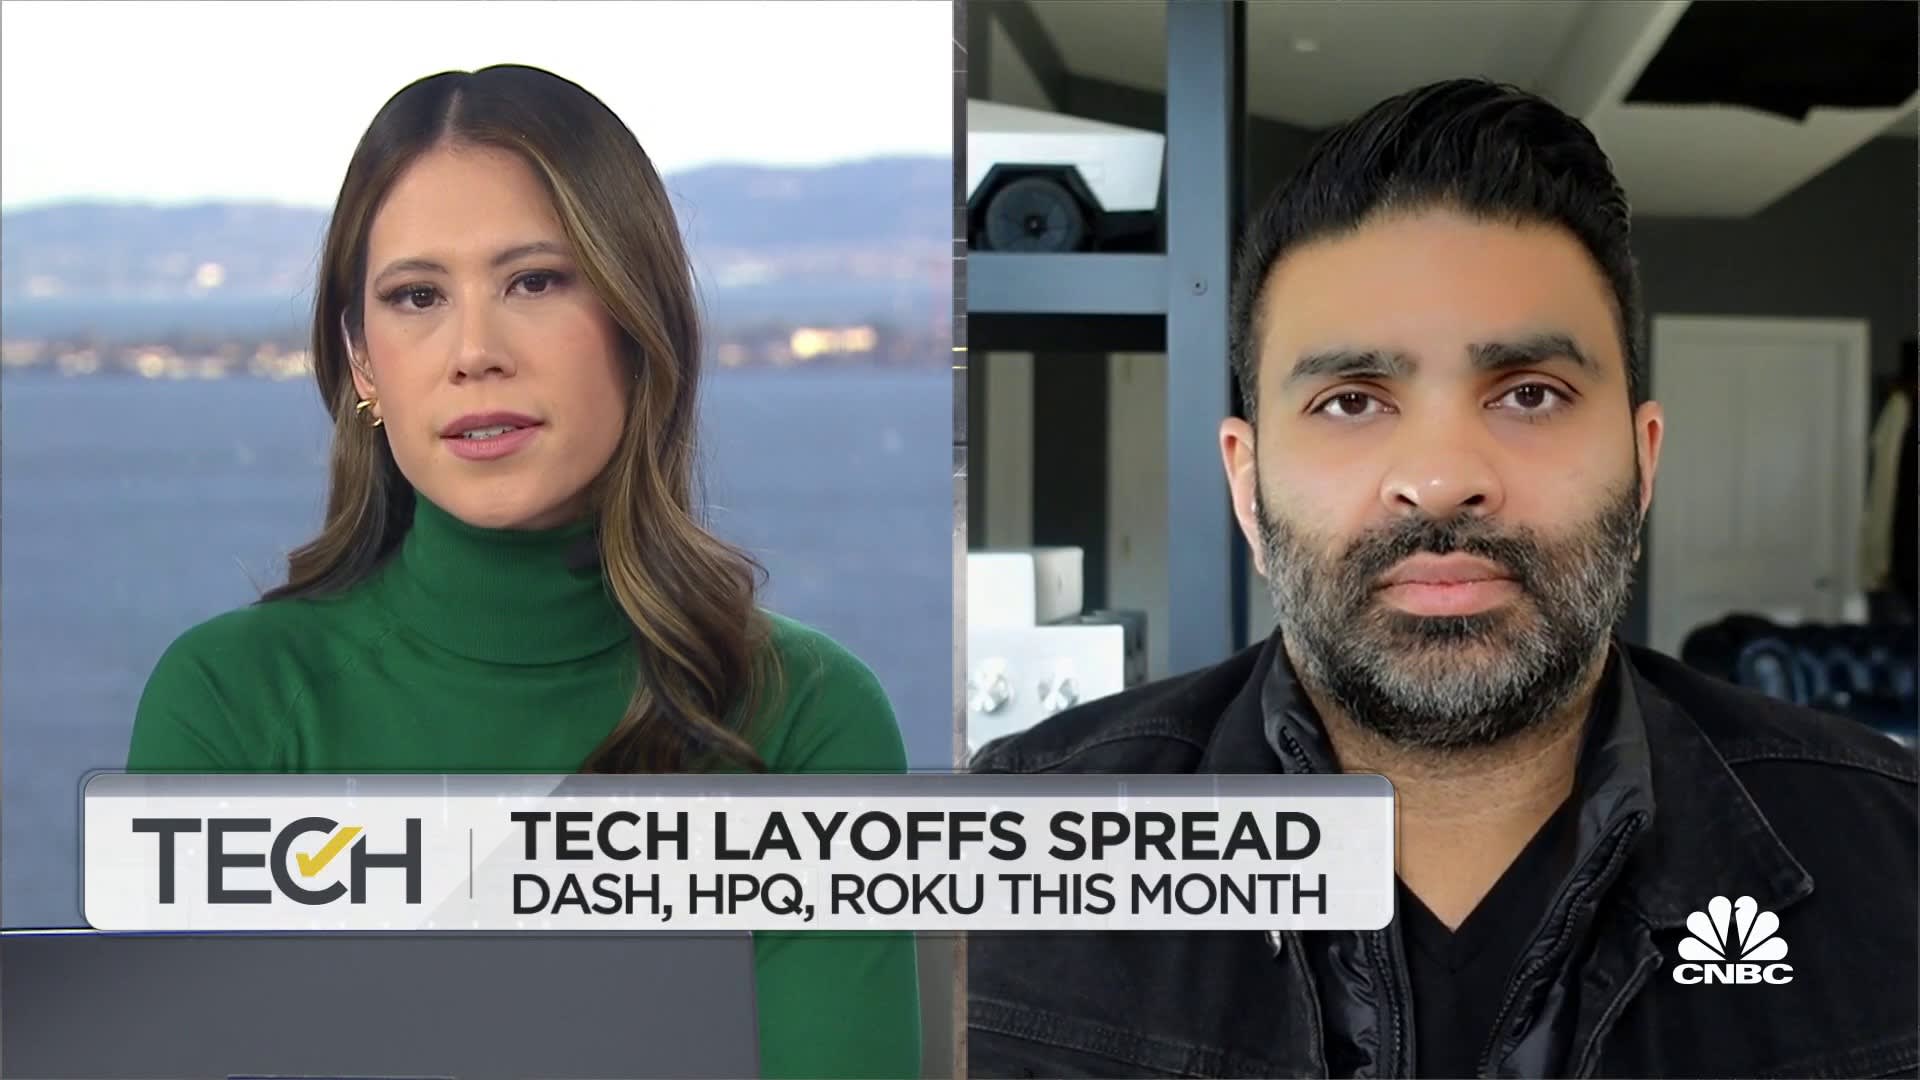 Tech layoffs are companies cutting back to their core business, says The Verge's Patel